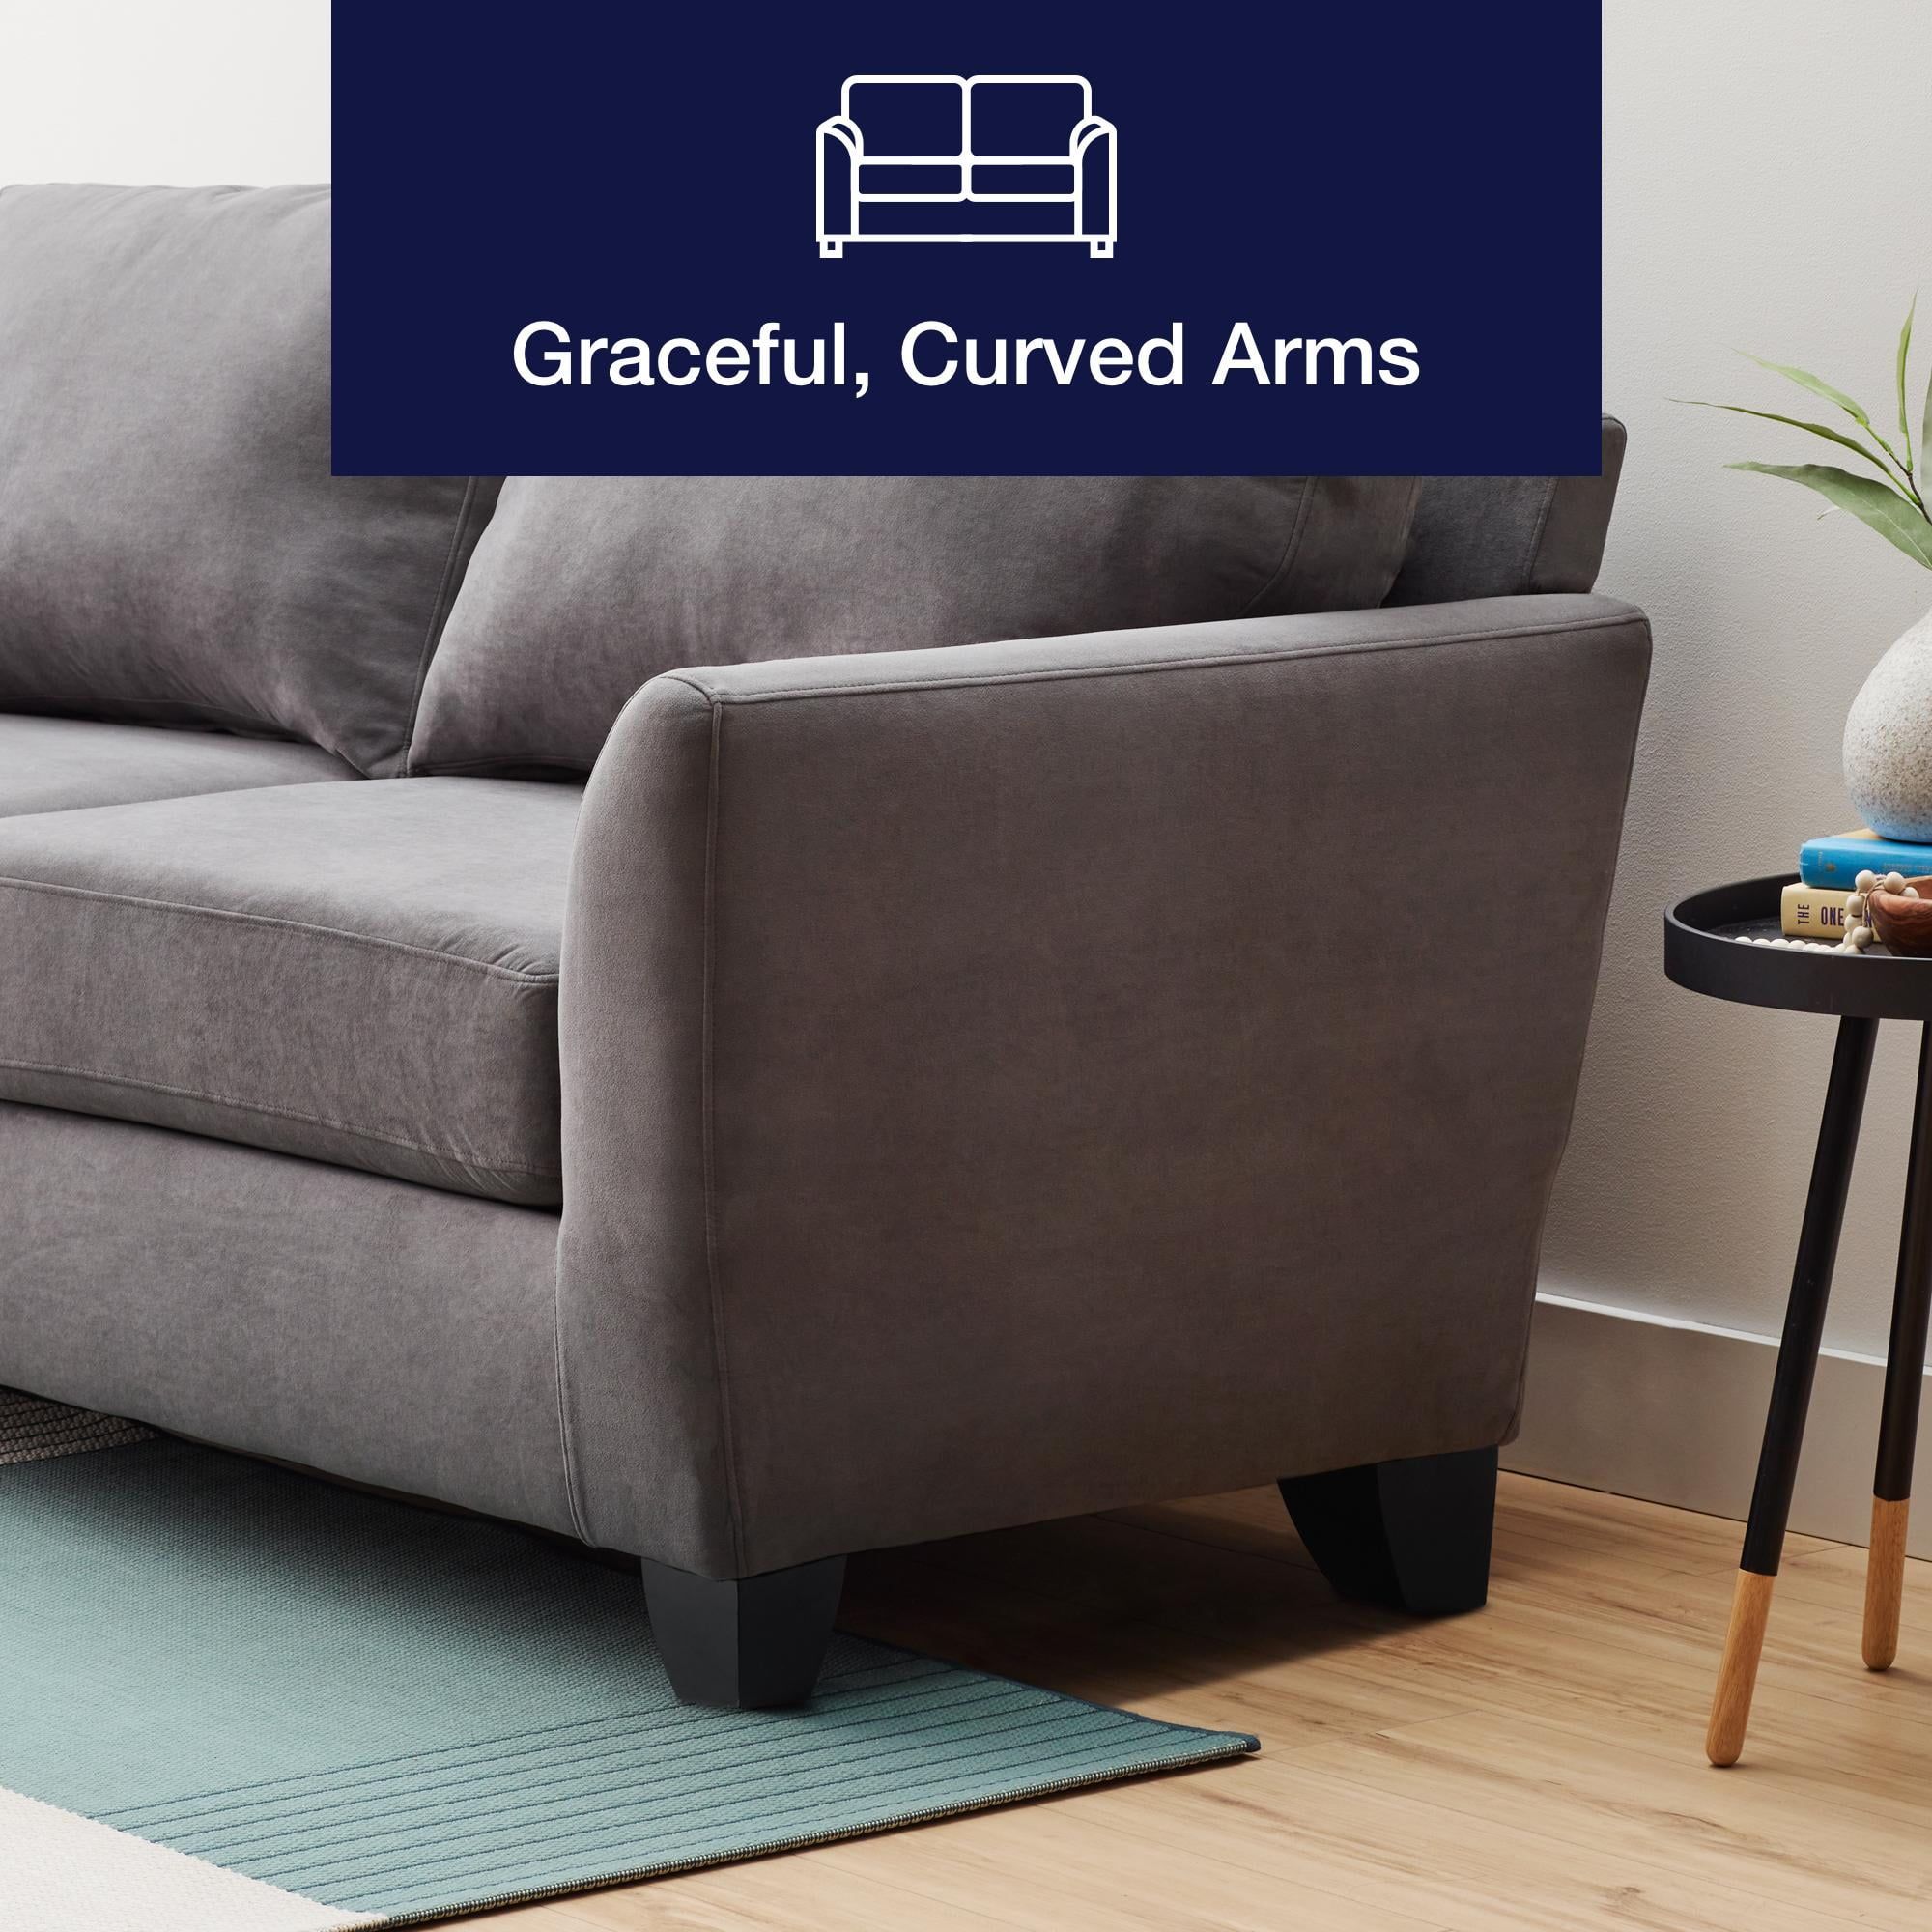 Gap Home Curved Arm Upholstered Sofa, Charcoal – Walmart Pertaining To Sofas With Curved Arms (View 12 of 15)